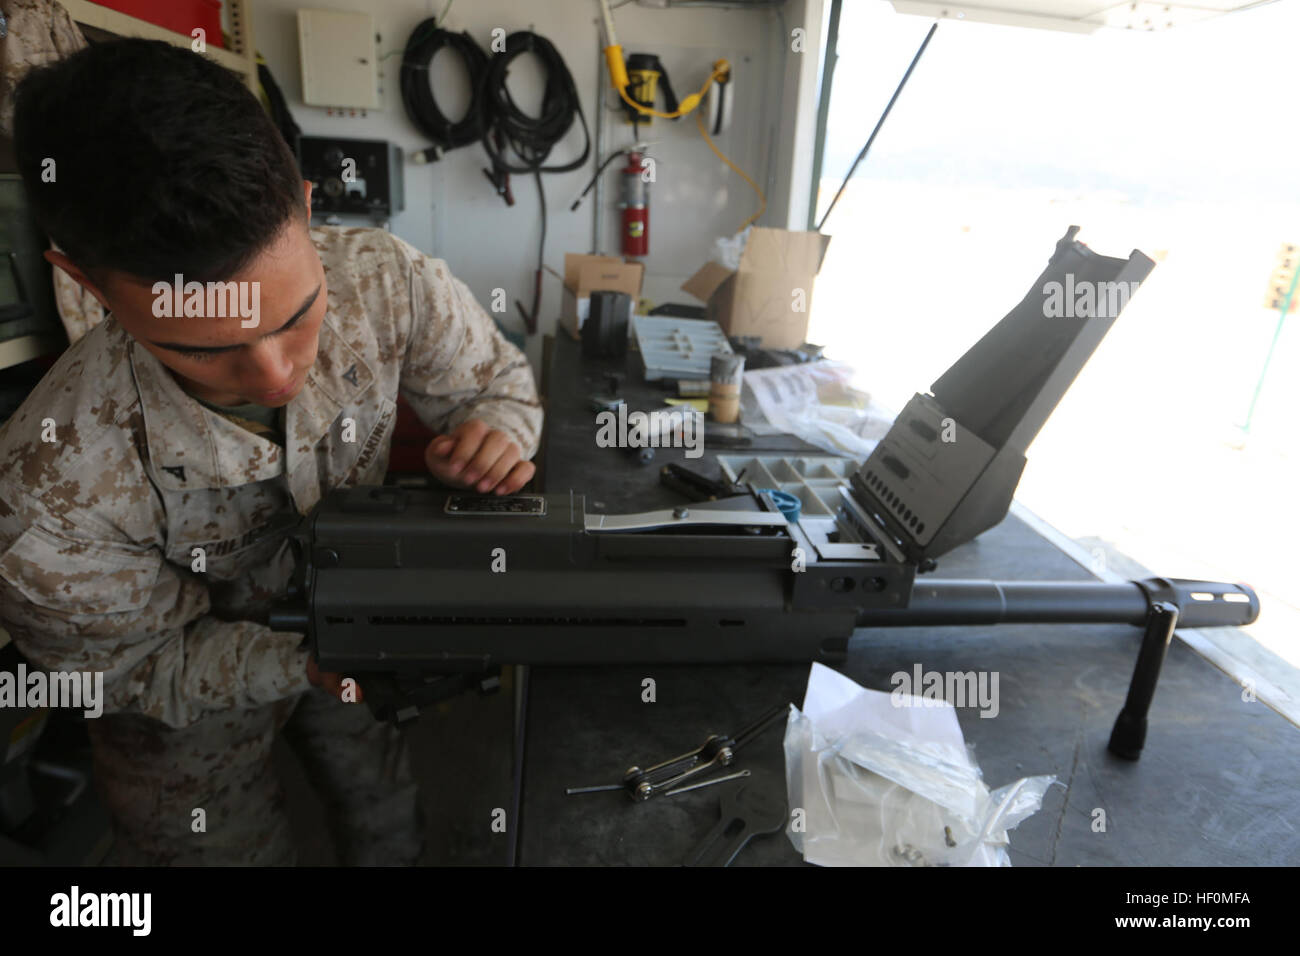 U.S. Marine Lance Cpl. Nicholas H. Schlienz cleans the barrel of a Mark-19 40 millimeter grenade launcher Apr. 6 at Gwangyang Port, Republic of Korea during exercise Freedom Banner 2014. Freedom Banner 14 is a maritime prepositioning force offloading exercise that enables amphibious assault exercise Ssang Yong 14. As Ssang Yong 14 concludes, the gear used in the amphibious assault is returned to the Freedom Banner 14 area of operations and prepped for the final back load of gear onto the USNS 2nd Lt. John P. Bobo. Schlienz is an armorer with 3rd Combat Assault Battalion, 3rd Marine Division, I Stock Photo